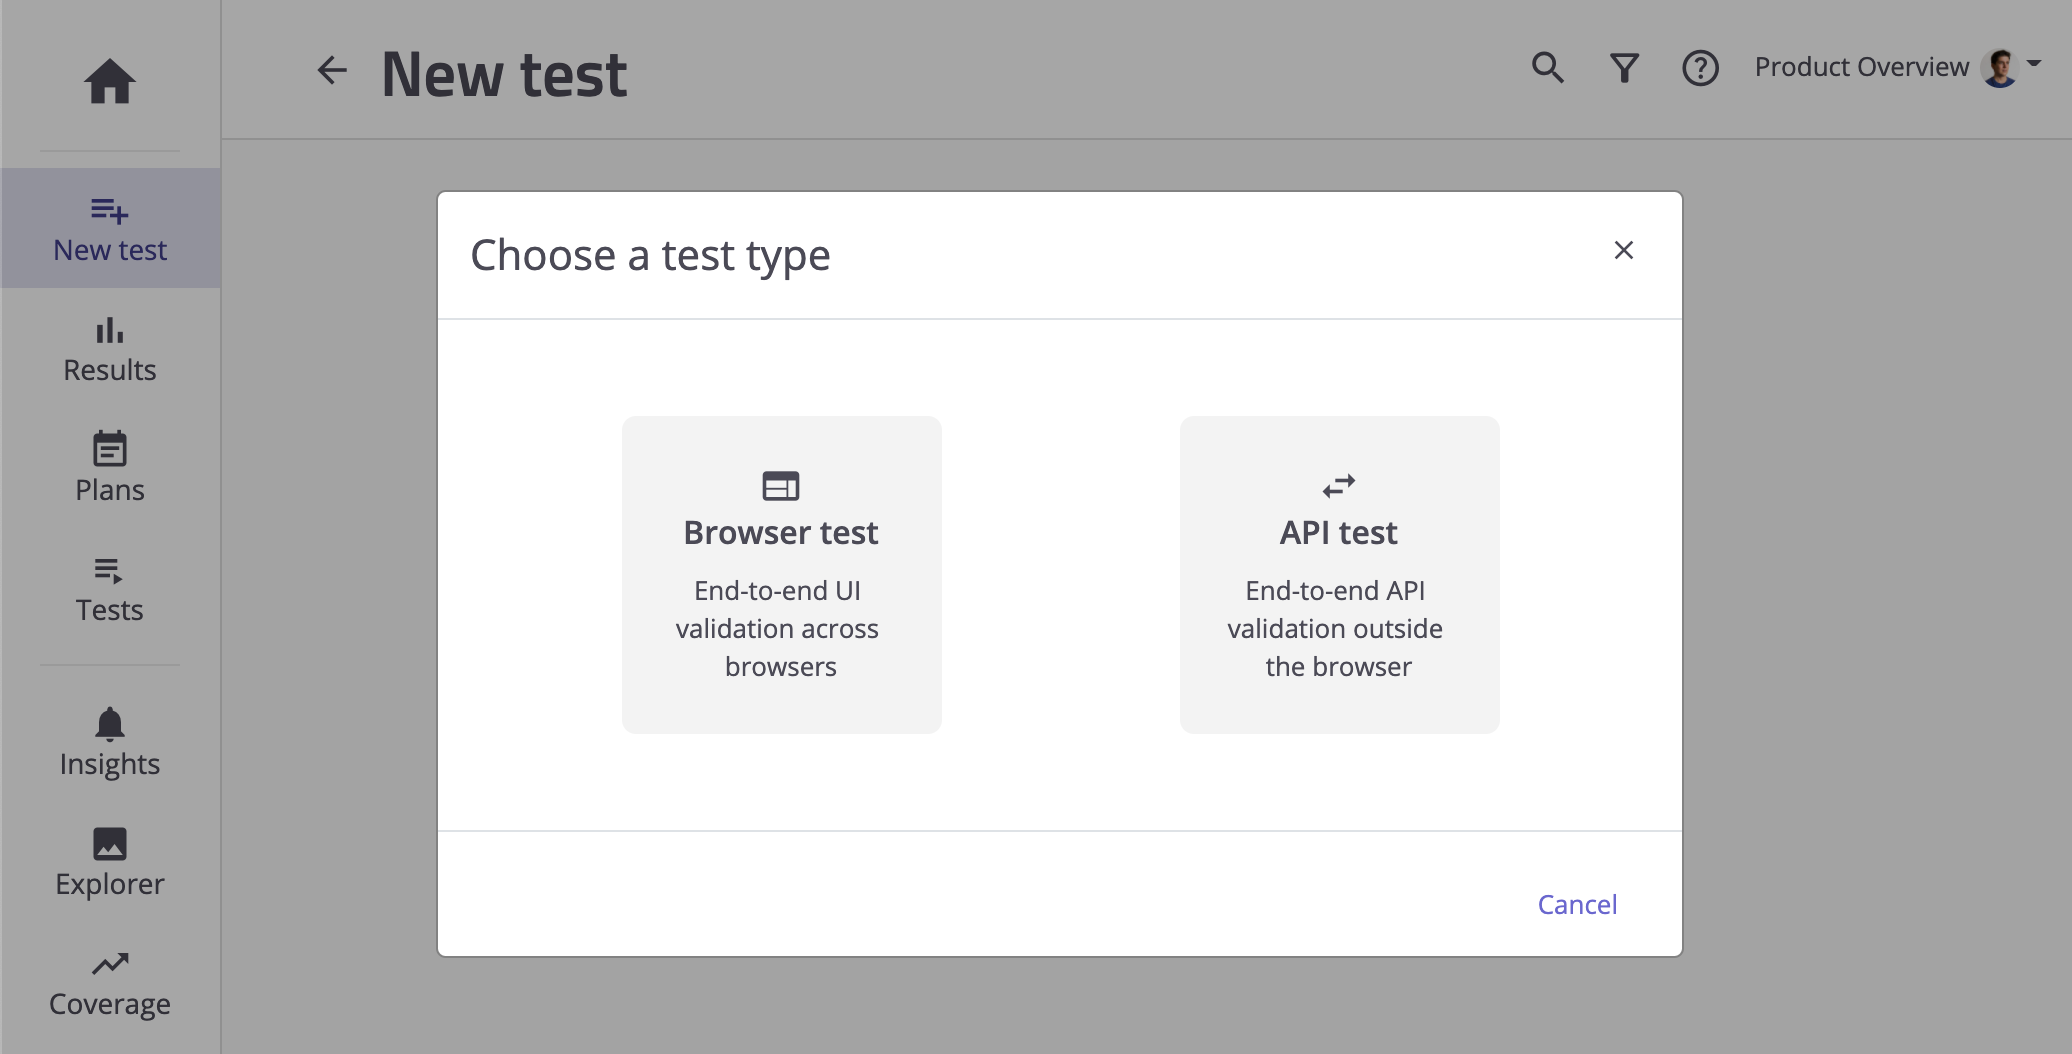 Choosing what test type to create in mabl.